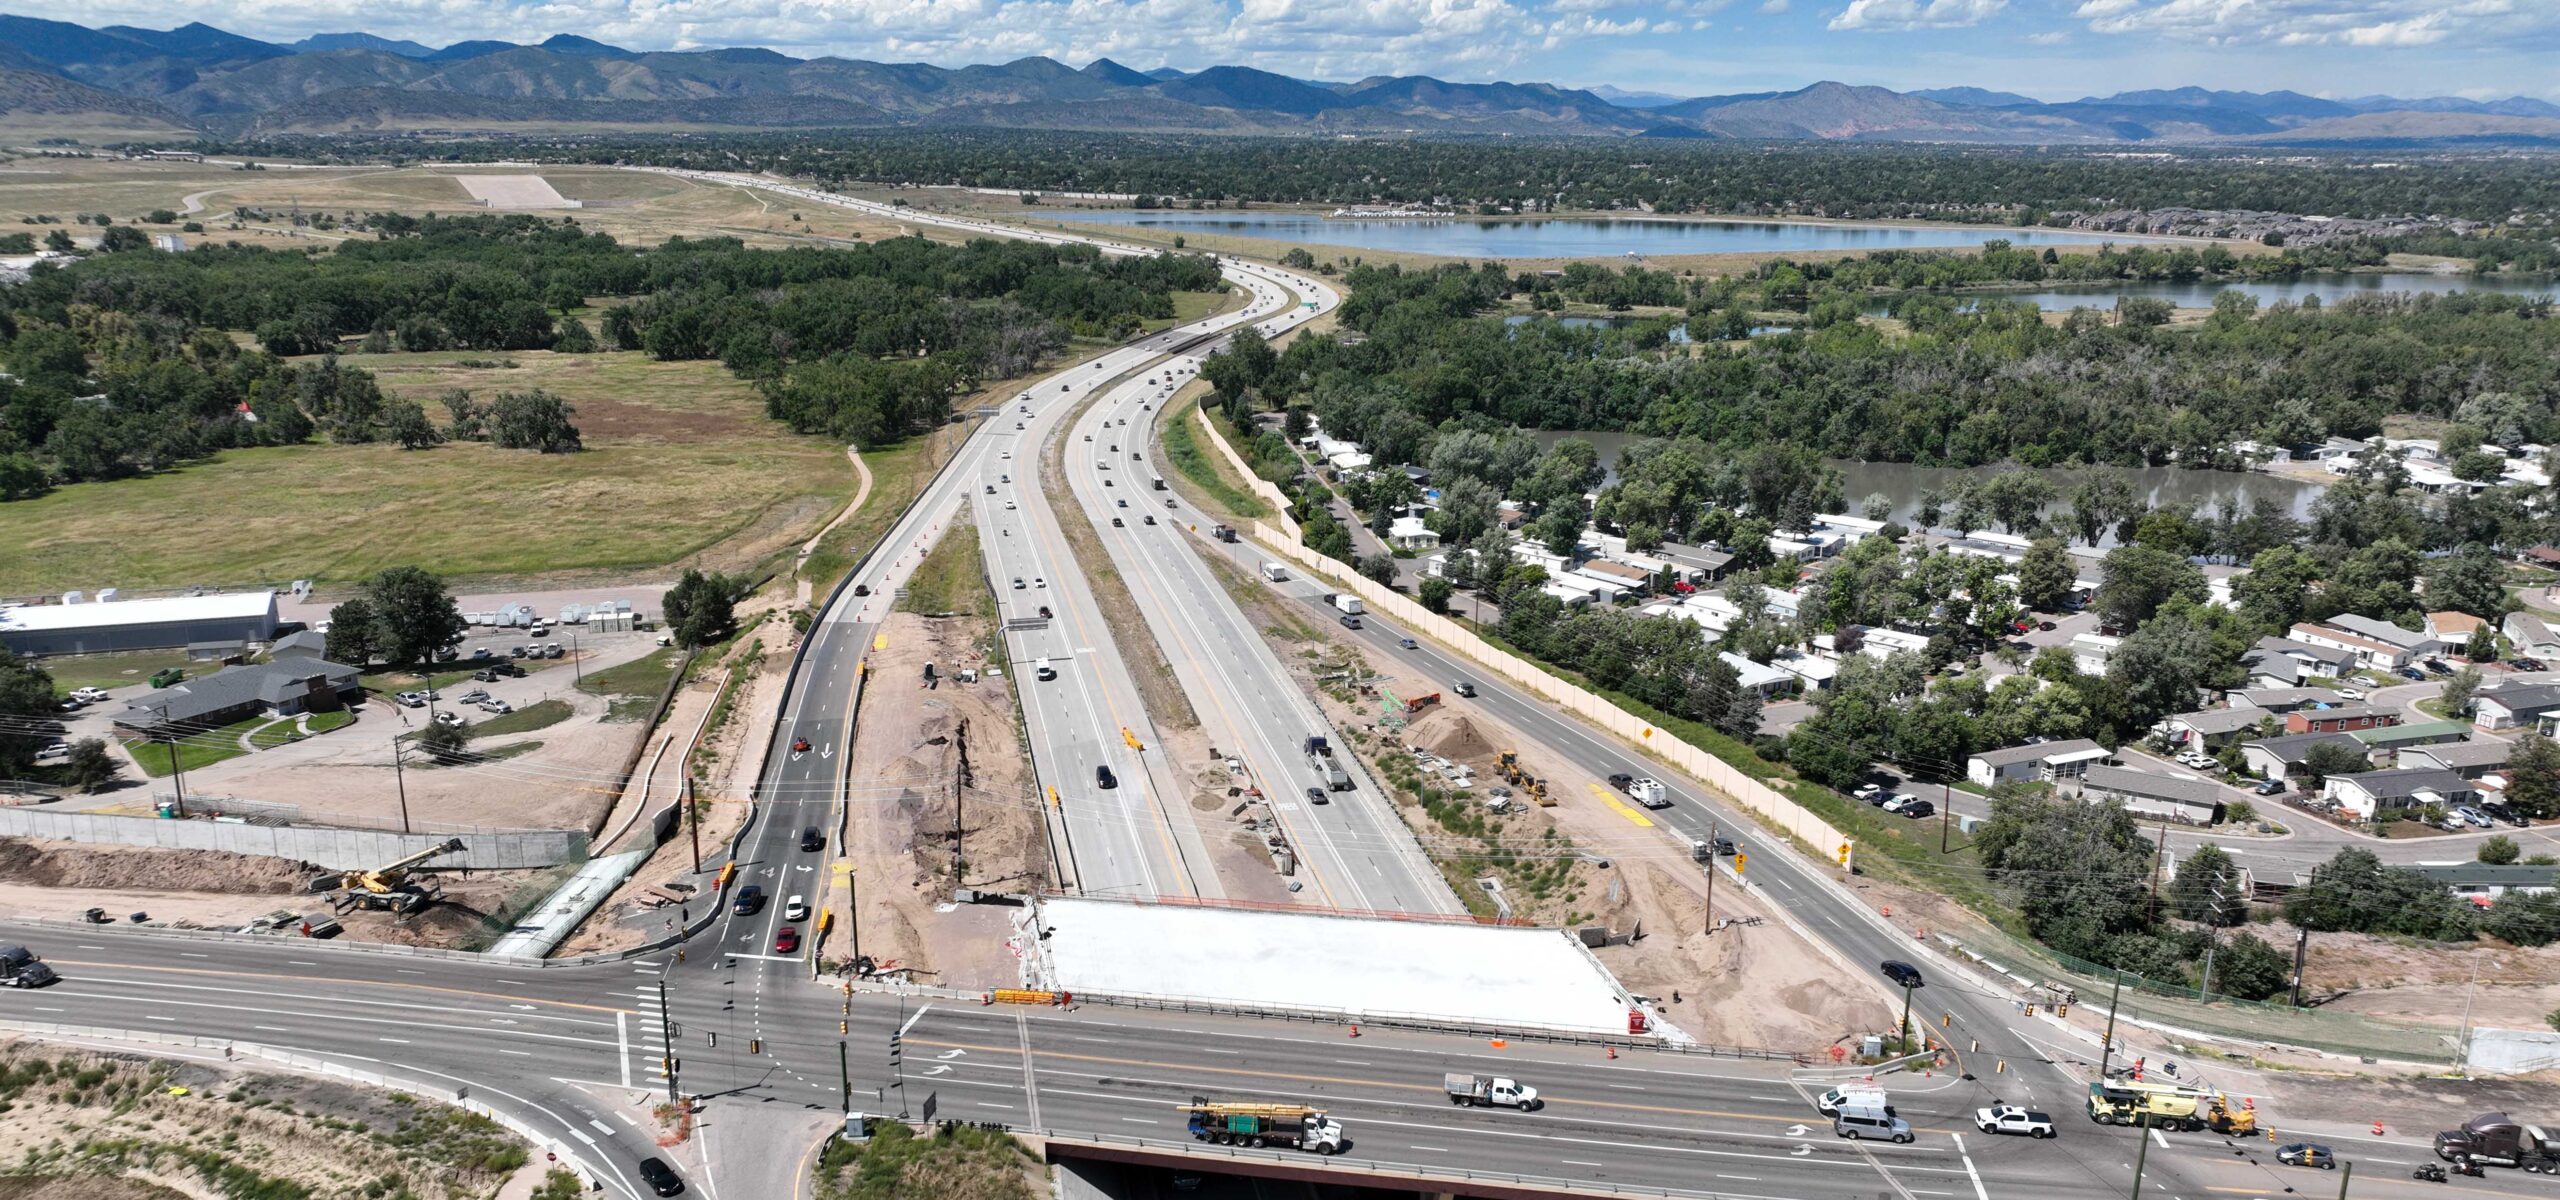 Weekend-long closures of C-470 ramps at US 85 for bridge and roadway construction - Douglas County